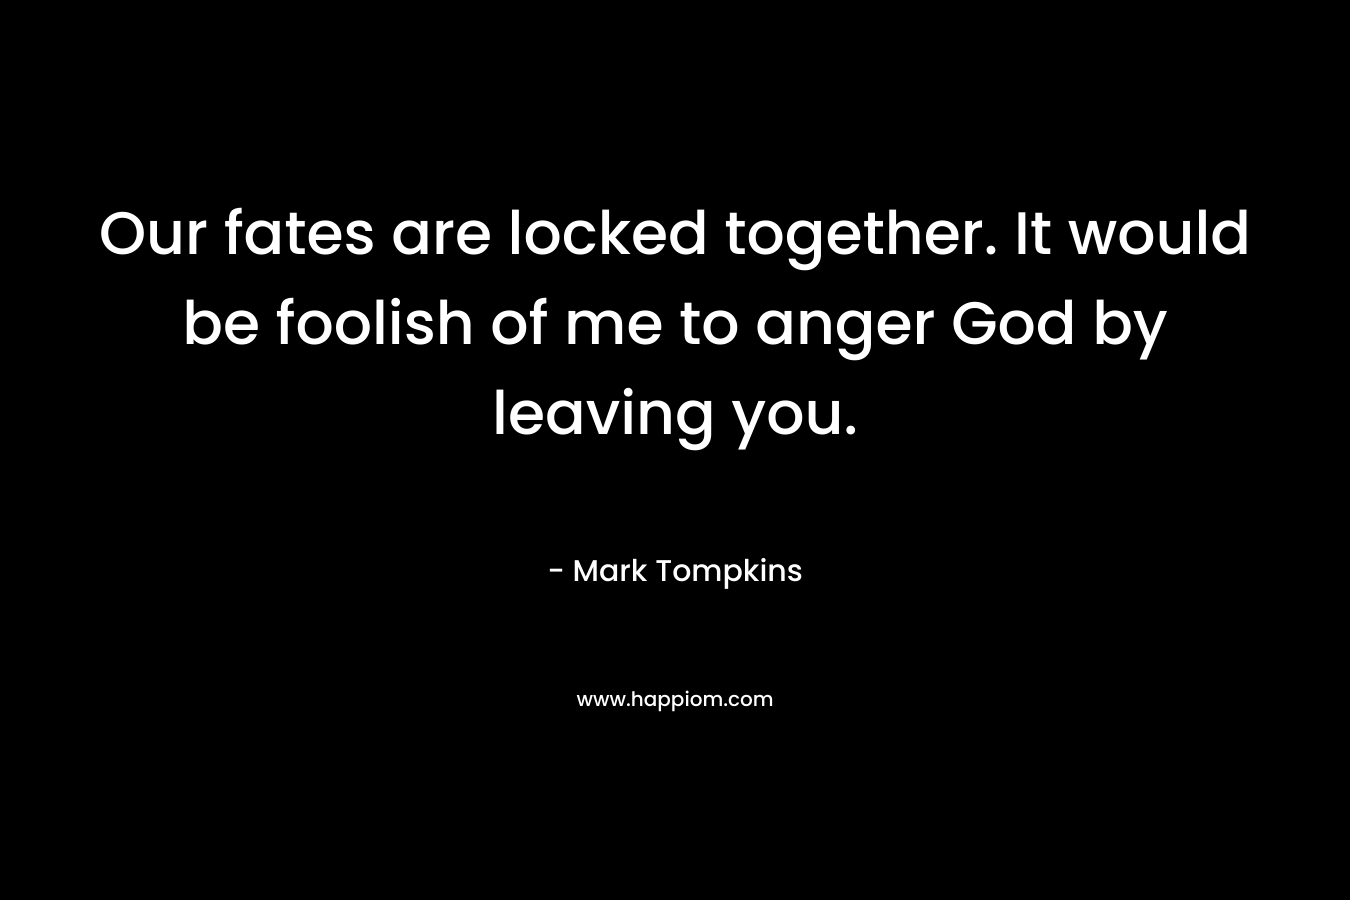 Our fates are locked together. It would be foolish of me to anger God by leaving you.